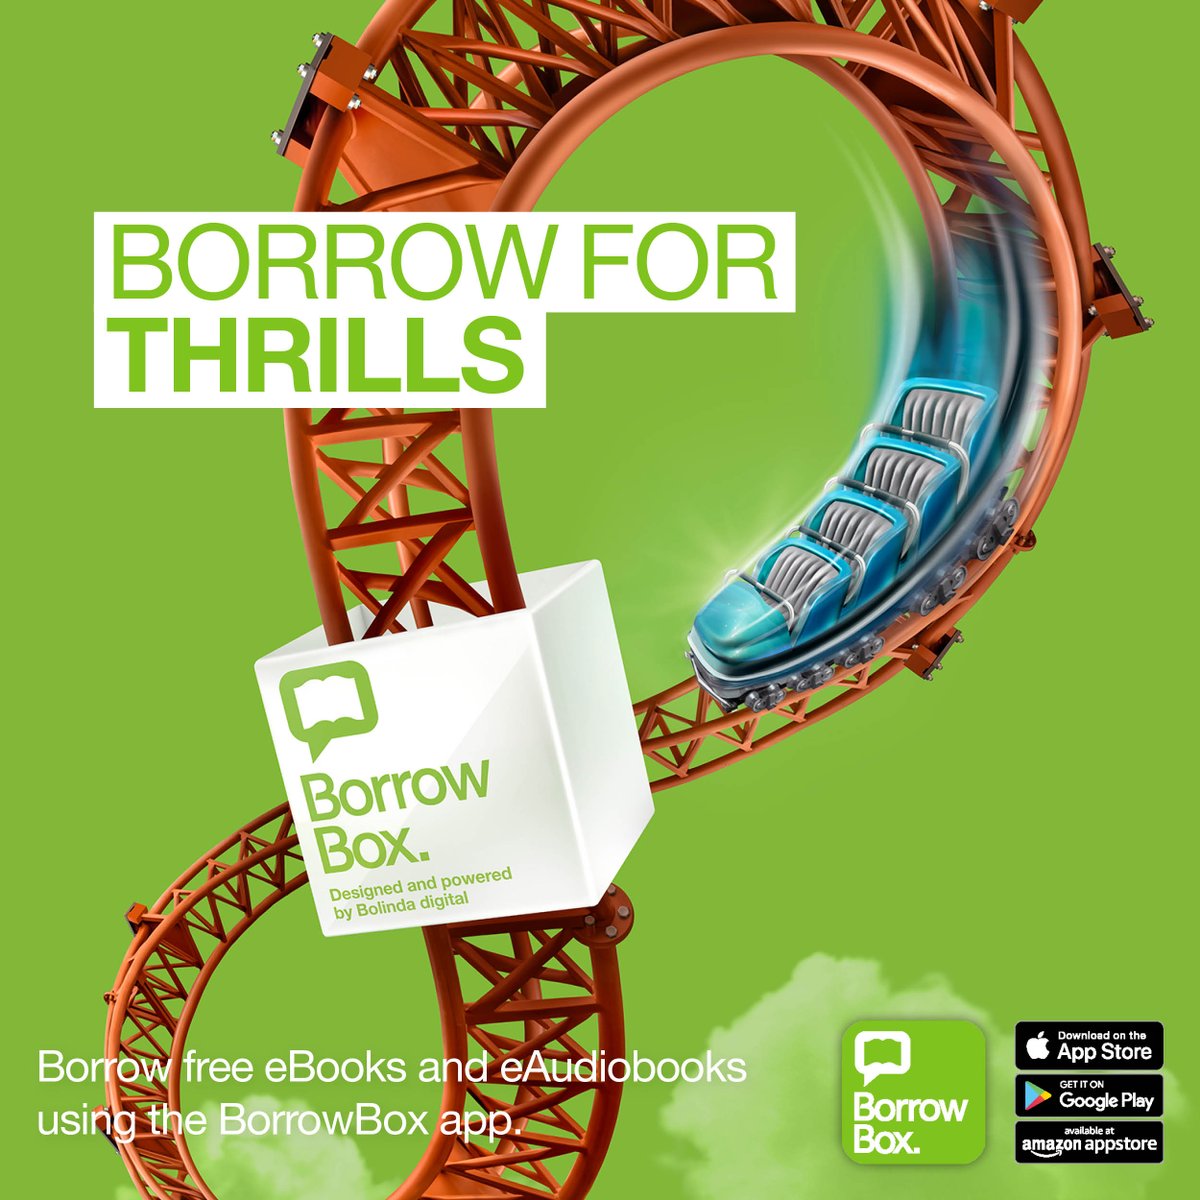 .@BorrowBox is here for thrills. Use the @Borrowbox App or visit staffordshire.gov.uk/eLibrary for a fantastic range of eBooks & eAudio